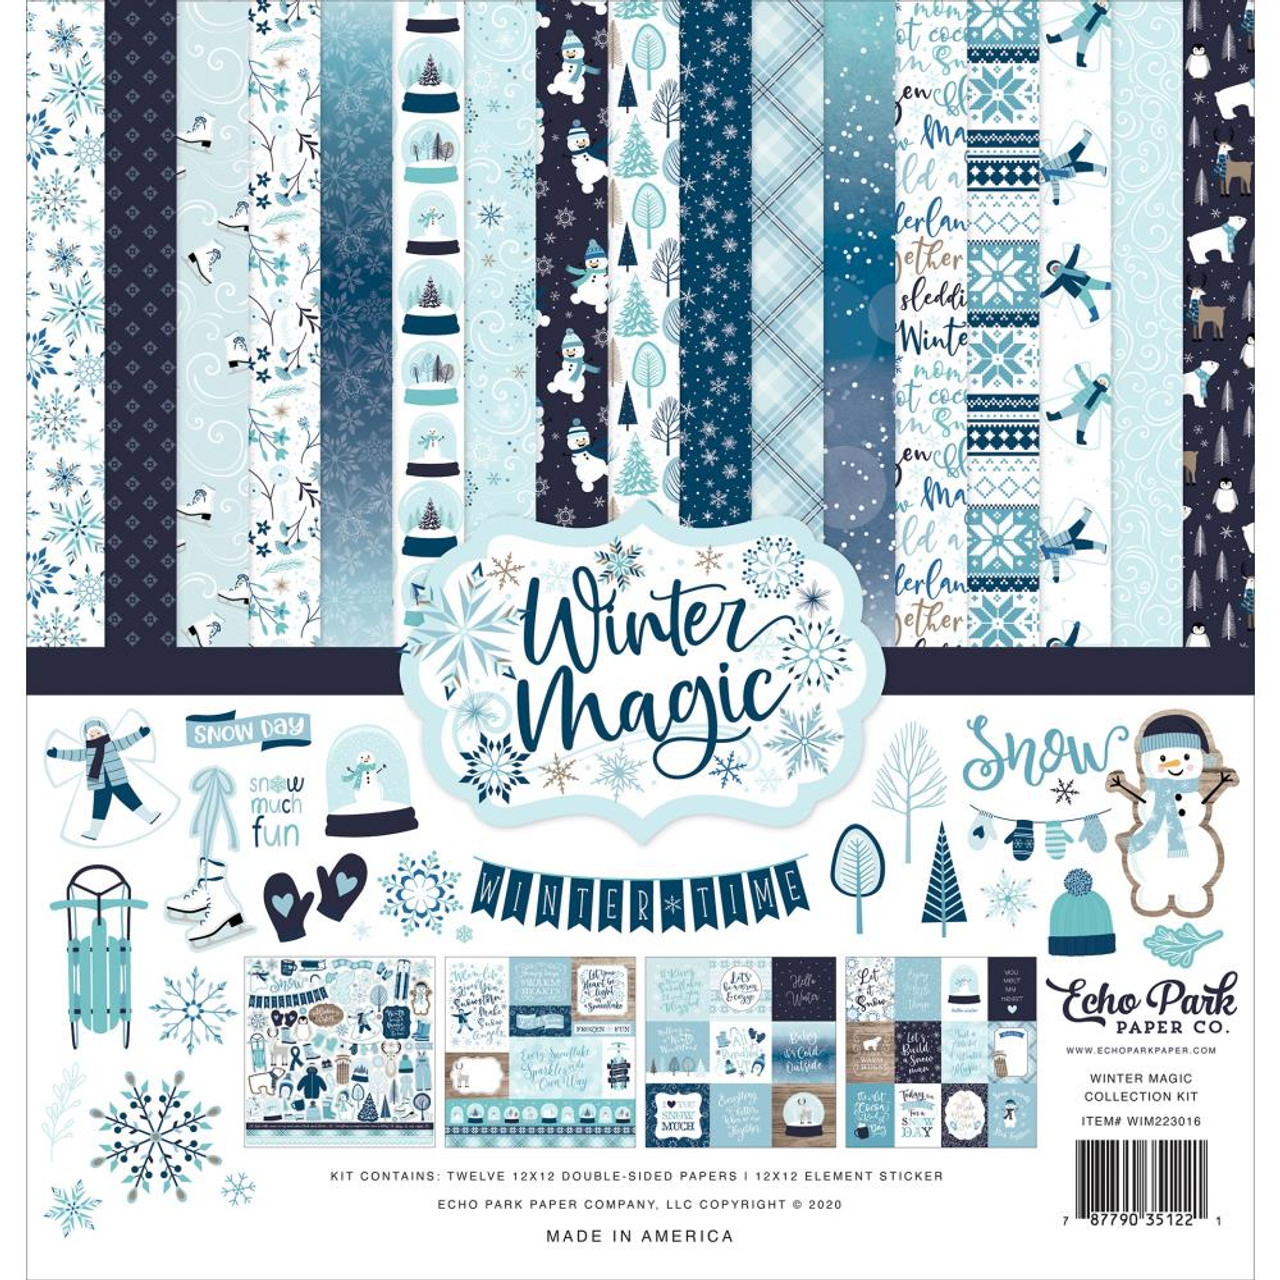 Great deals on Echo Park Paper Collection Kit 12